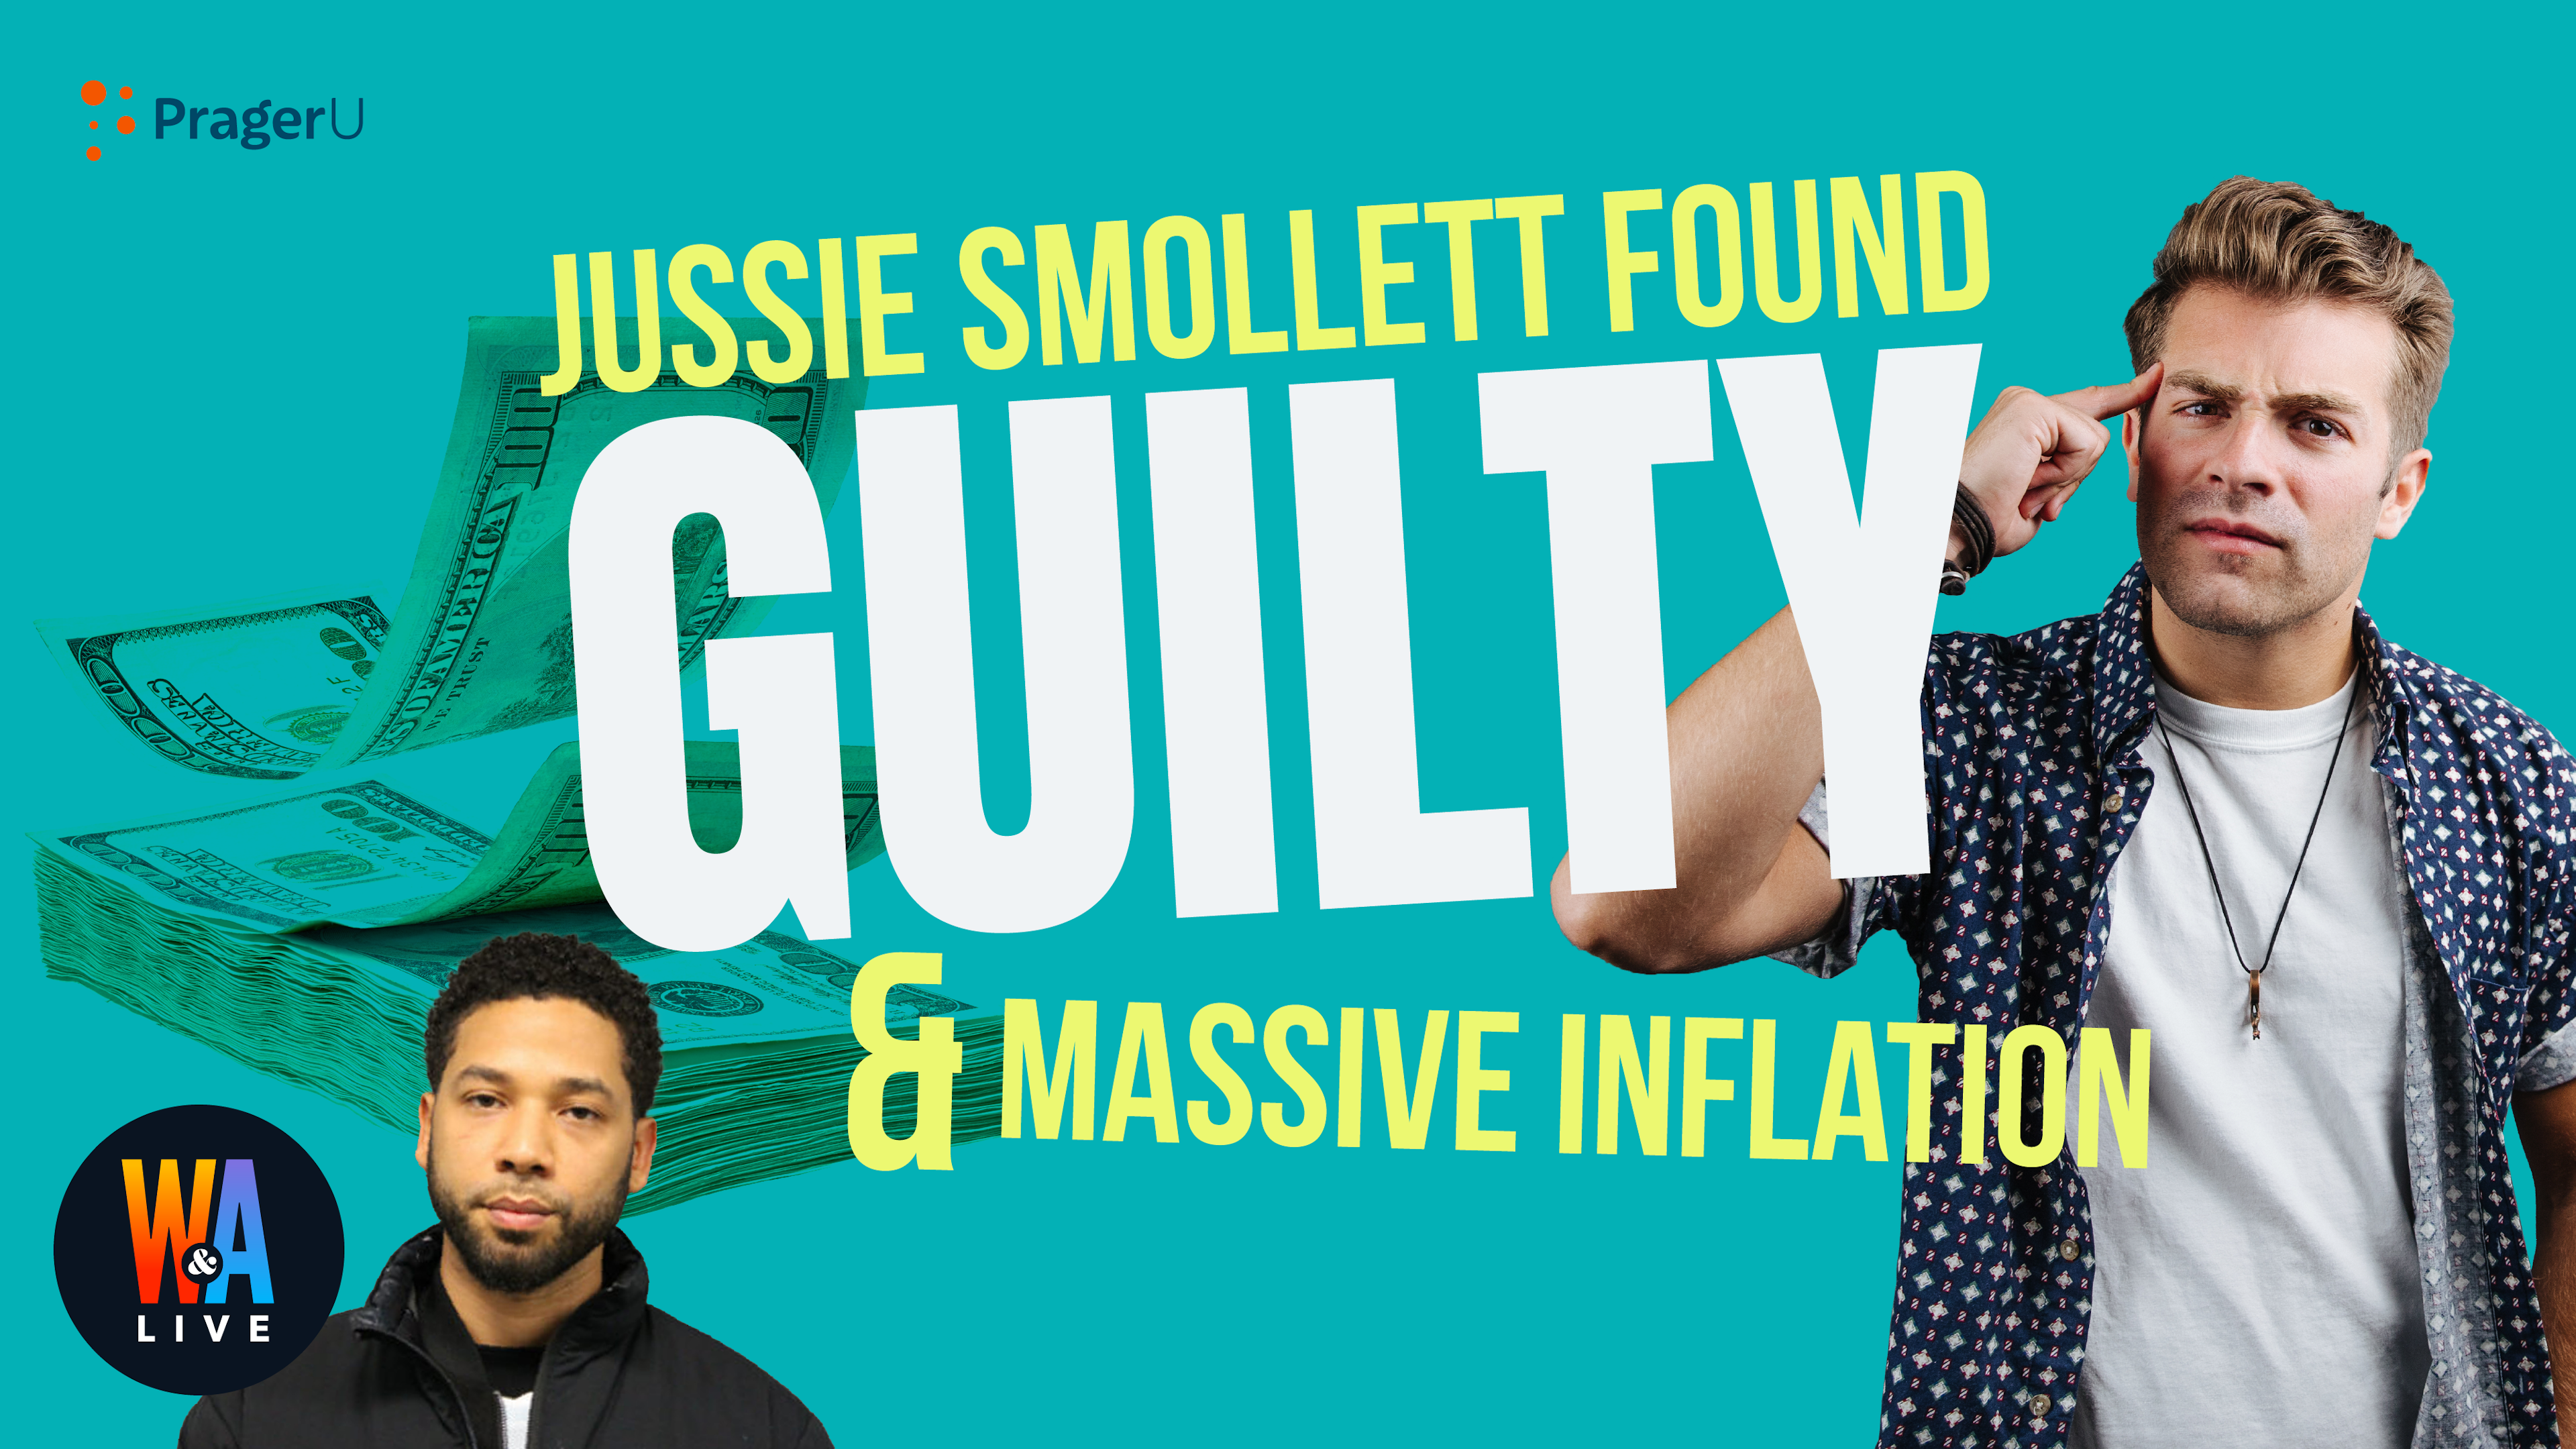 Jussie Smollett Found Guilty and Massive Inflation: 12/10/2021